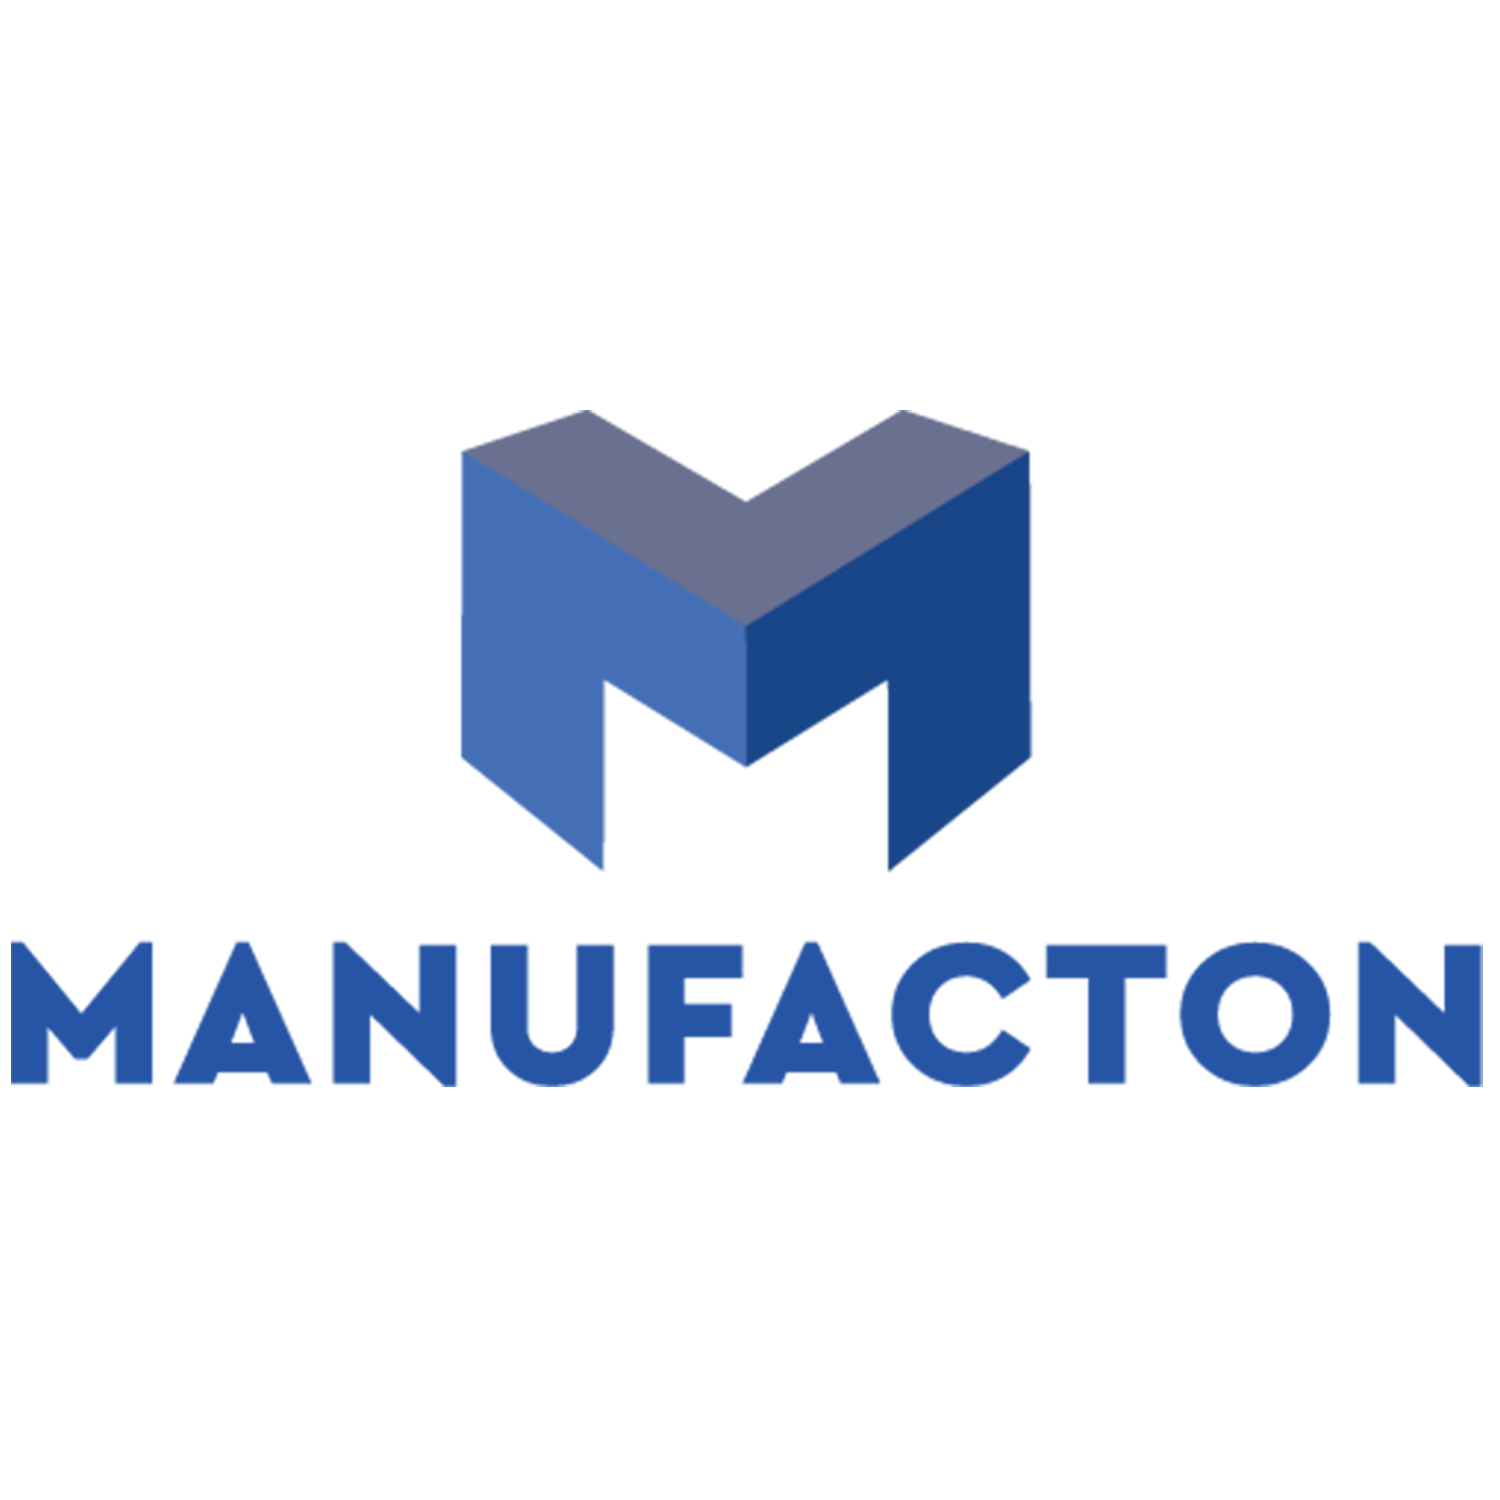 ManufactOn (new).png